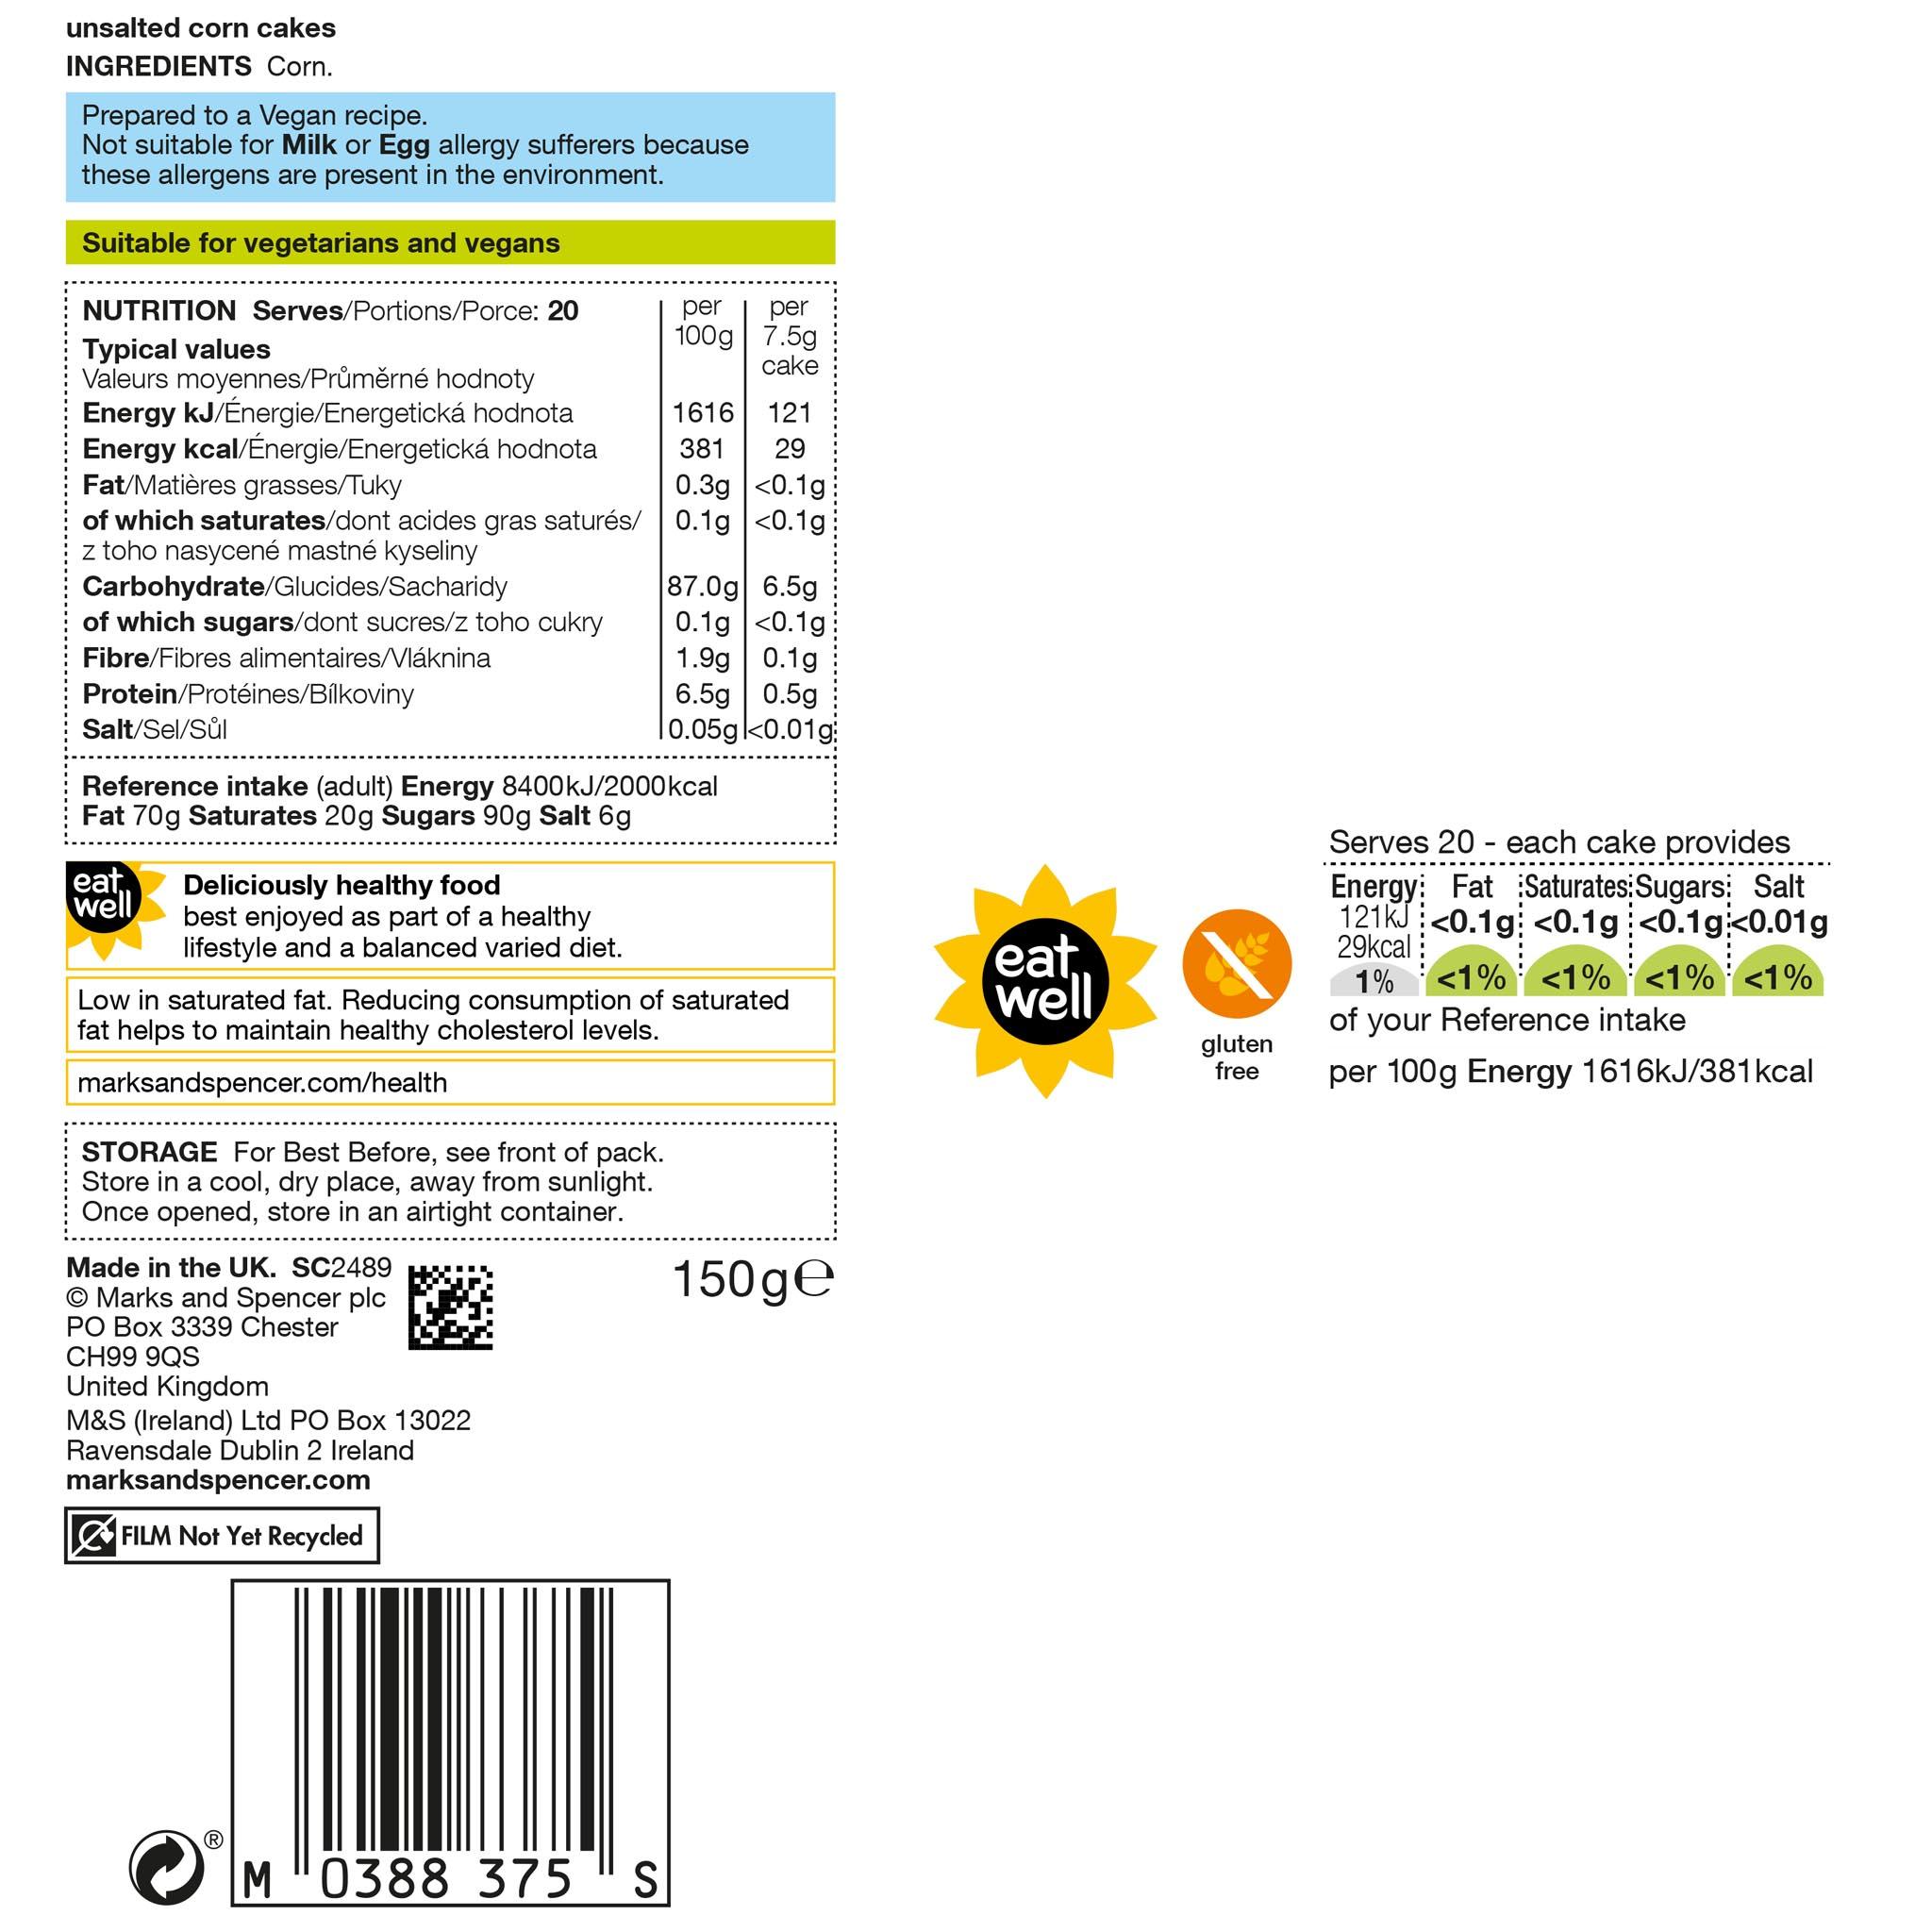 Unsalted Corn Cakes 150g Label